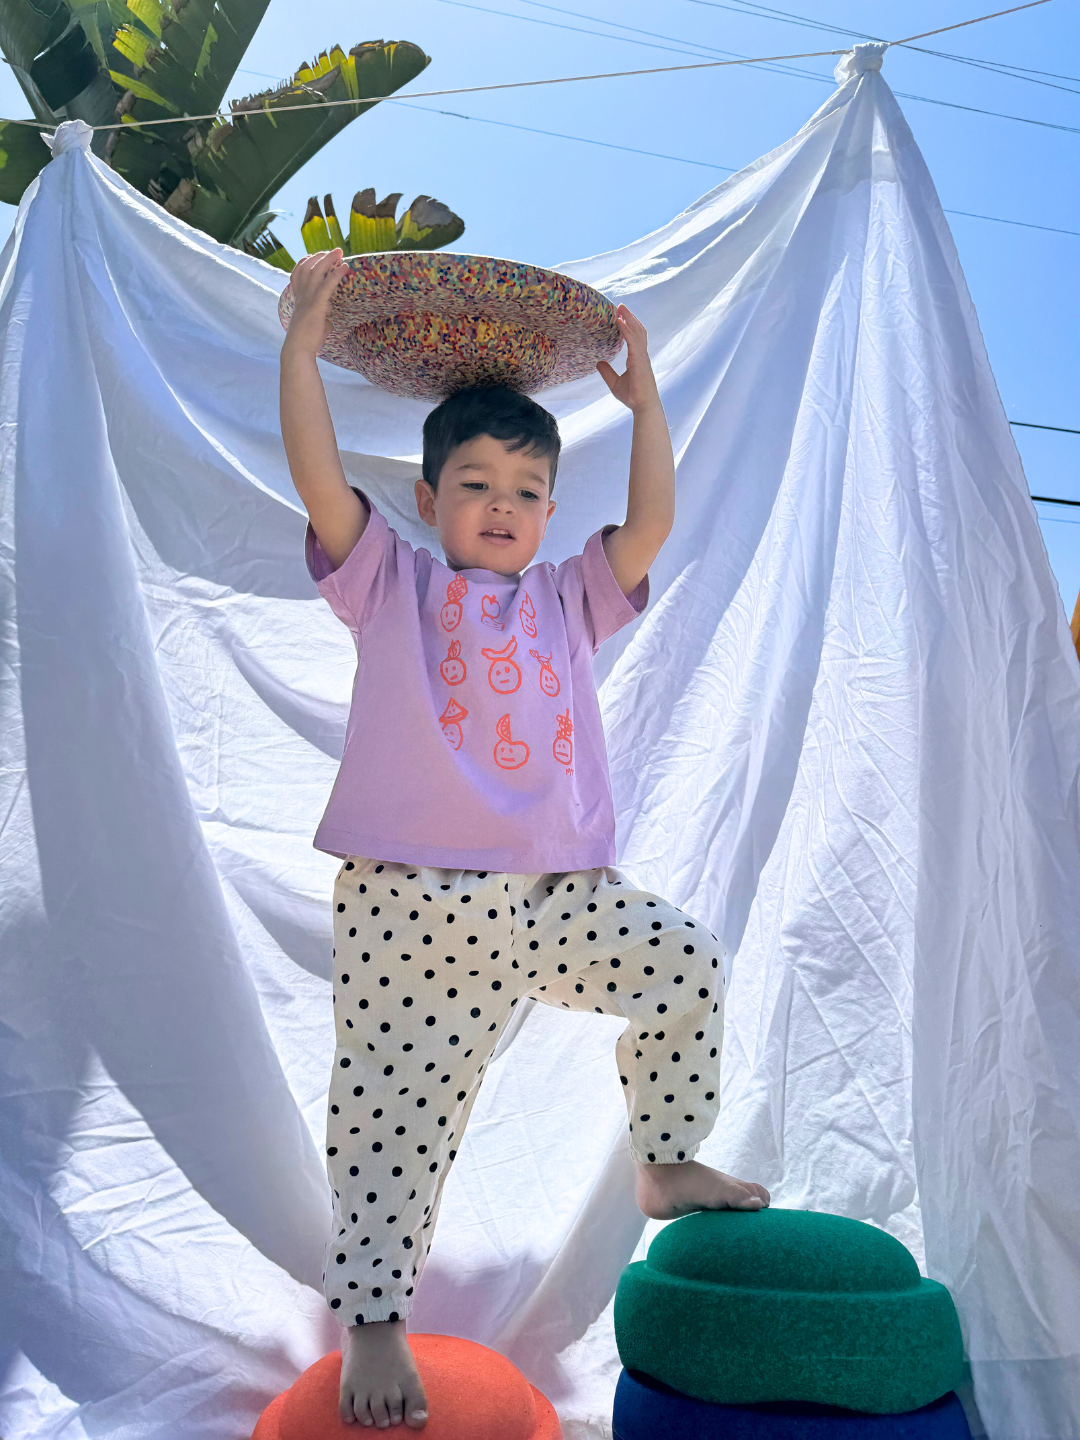 Child wearing the fruit faces tee in violet, with white pants with black polka dots. He stands on colorful play stepping stones and holds one over his head, in front of a white sheet backdrop.